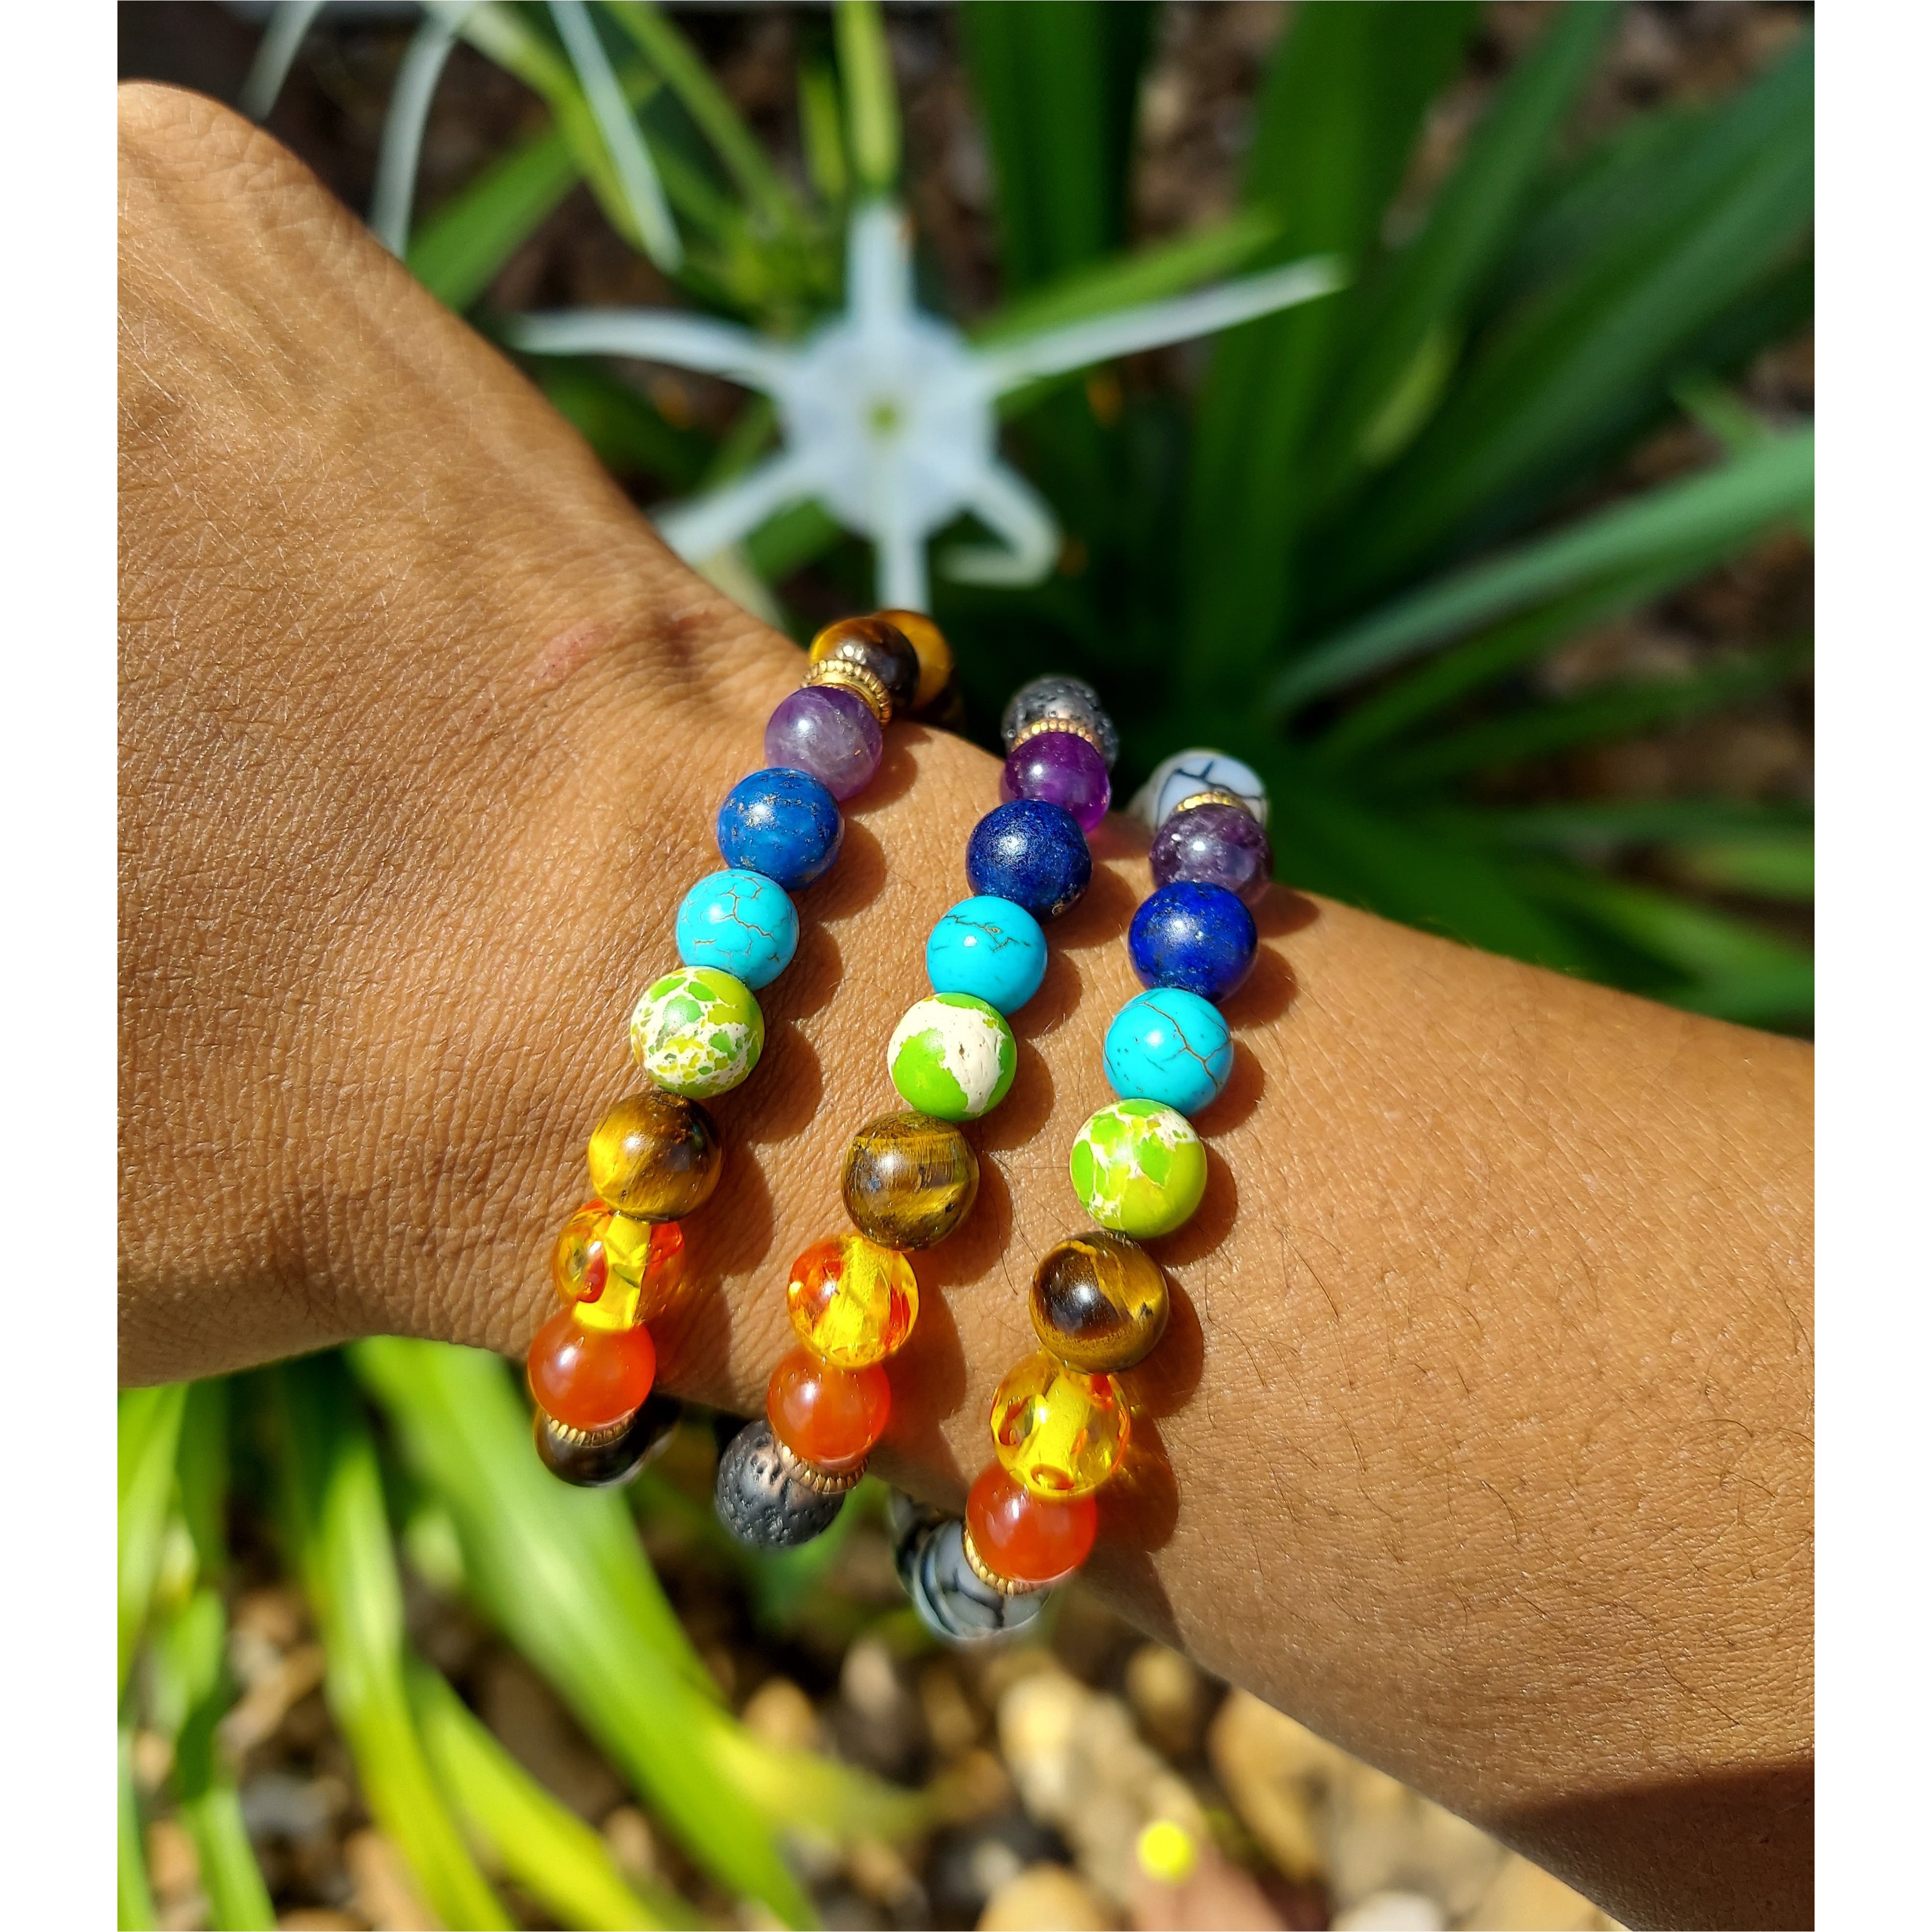 Bracelets Jewelry Strands Bead Company 7 Chakra Bracelet With Meaning  Cardfor Men Women Natural Crystal Healing Anxiety Jewellery Mandala Yoga Me  From Sexyhanz, $8.04 | DHgate.Com